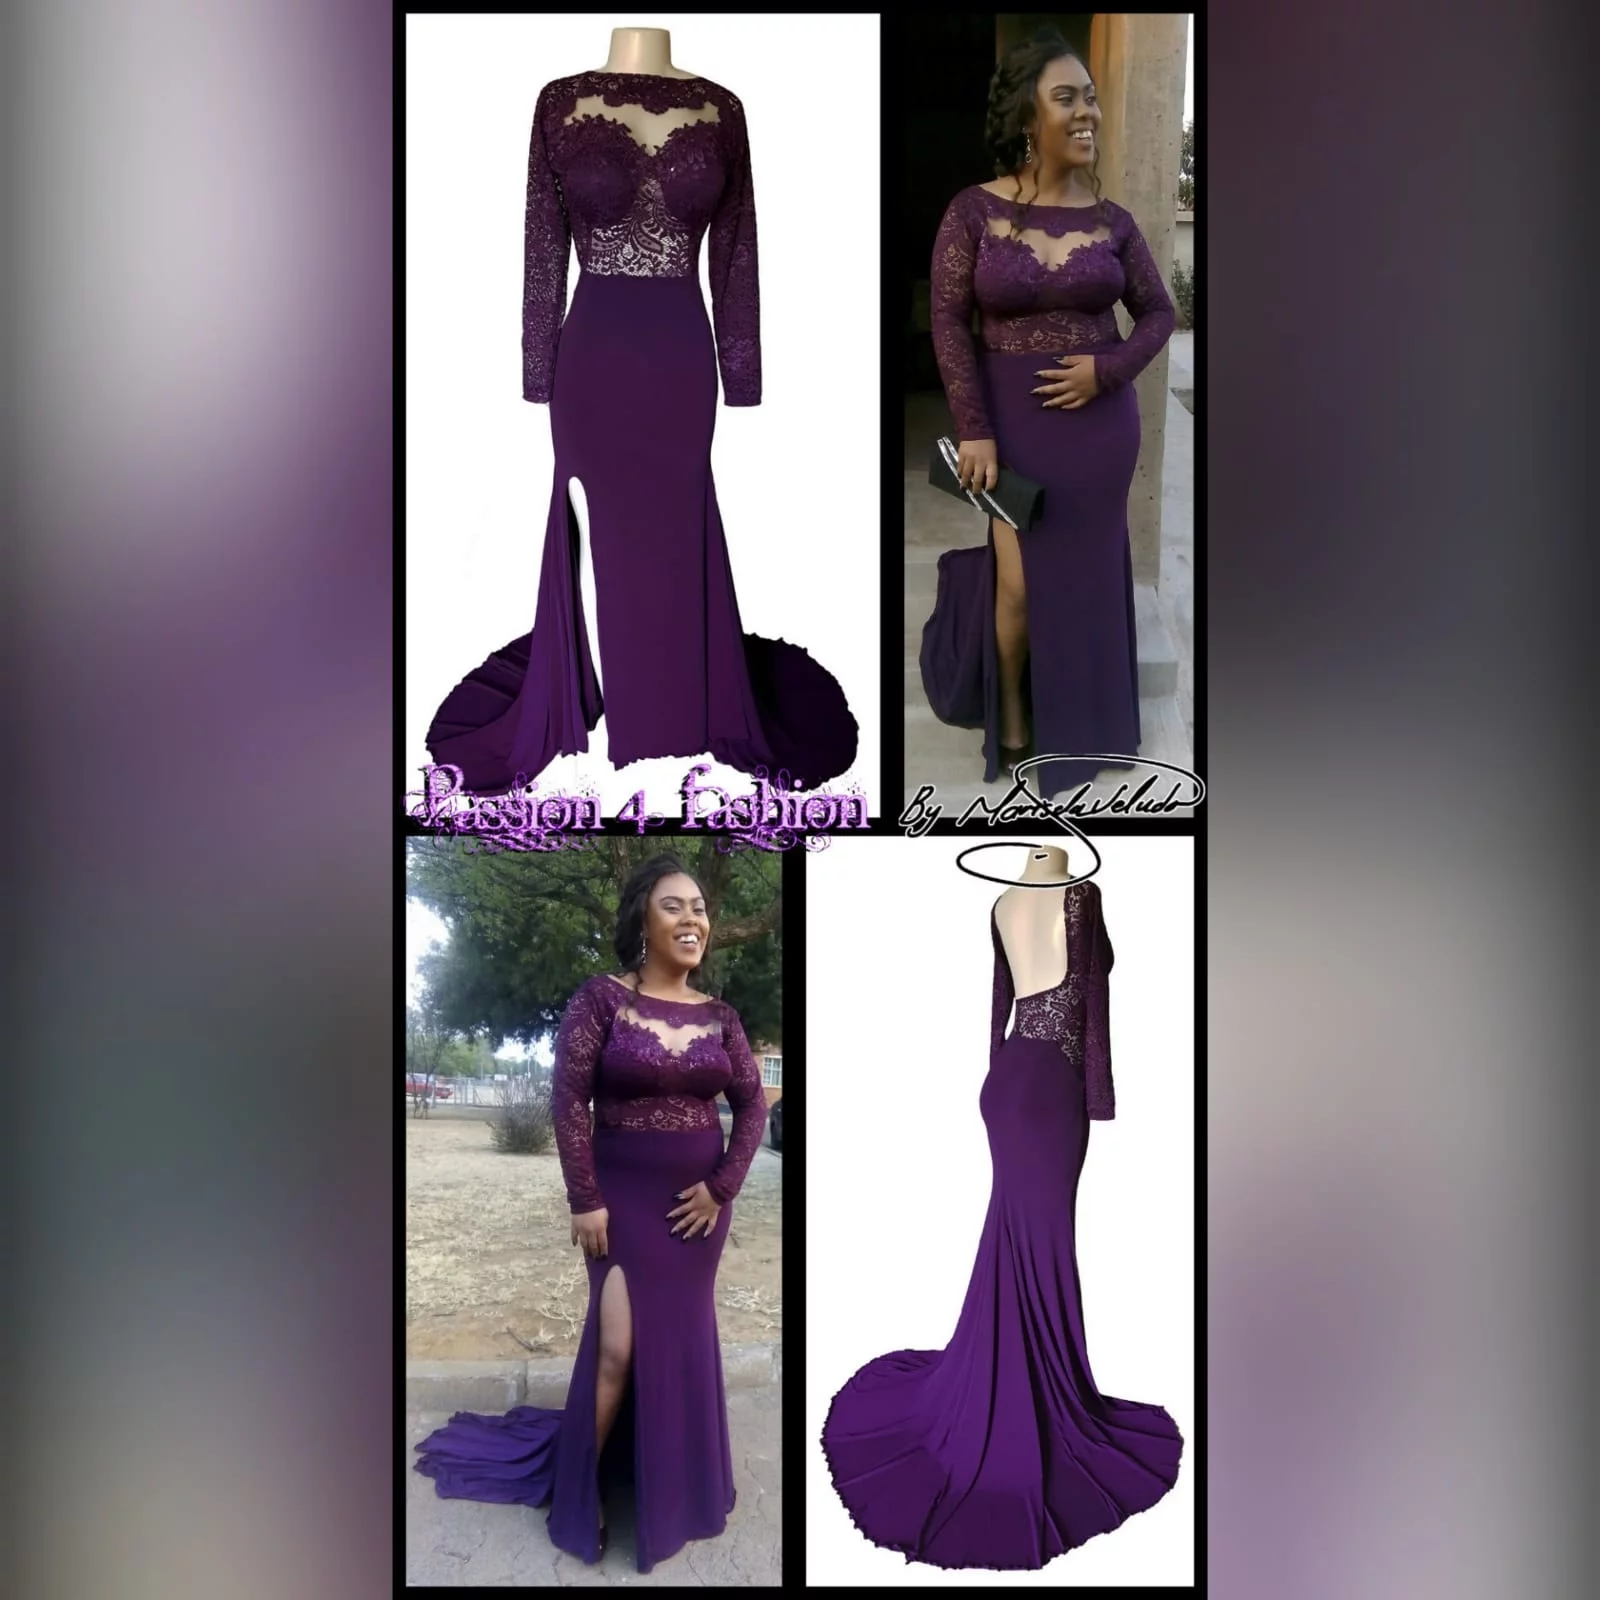 Plum lace bodice soft mermaid matric dance dress 2 plum lace bodice, soft mermaid matric dance dress with a low open rounded open back and hip lace design. With long lace sleeves and a long train.